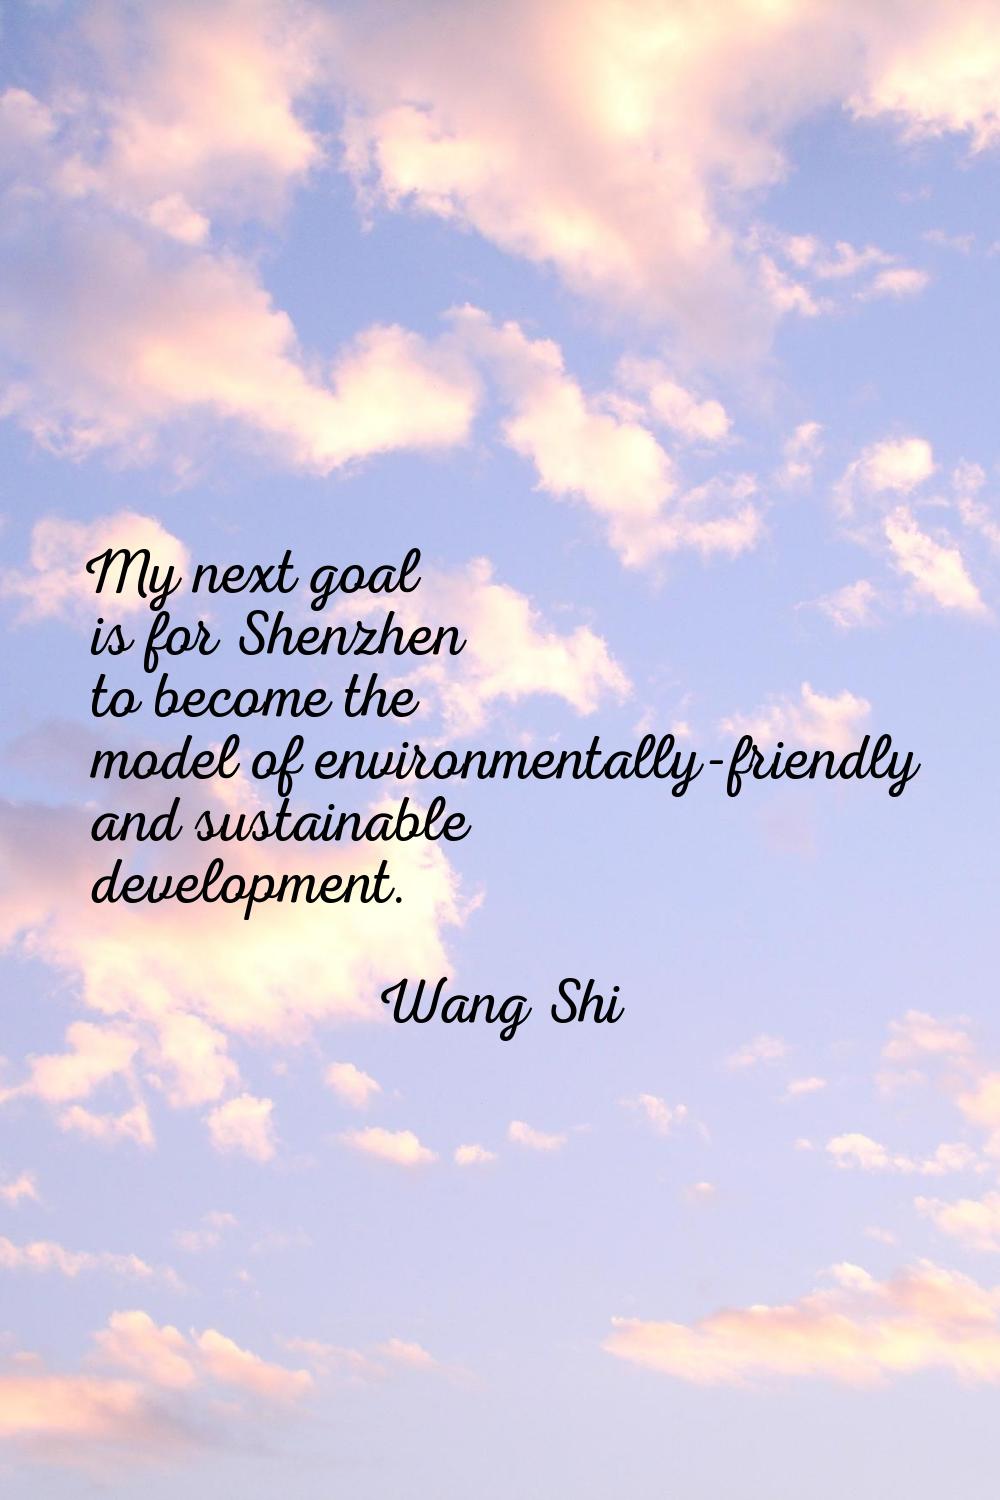 My next goal is for Shenzhen to become the model of environmentally-friendly and sustainable develo